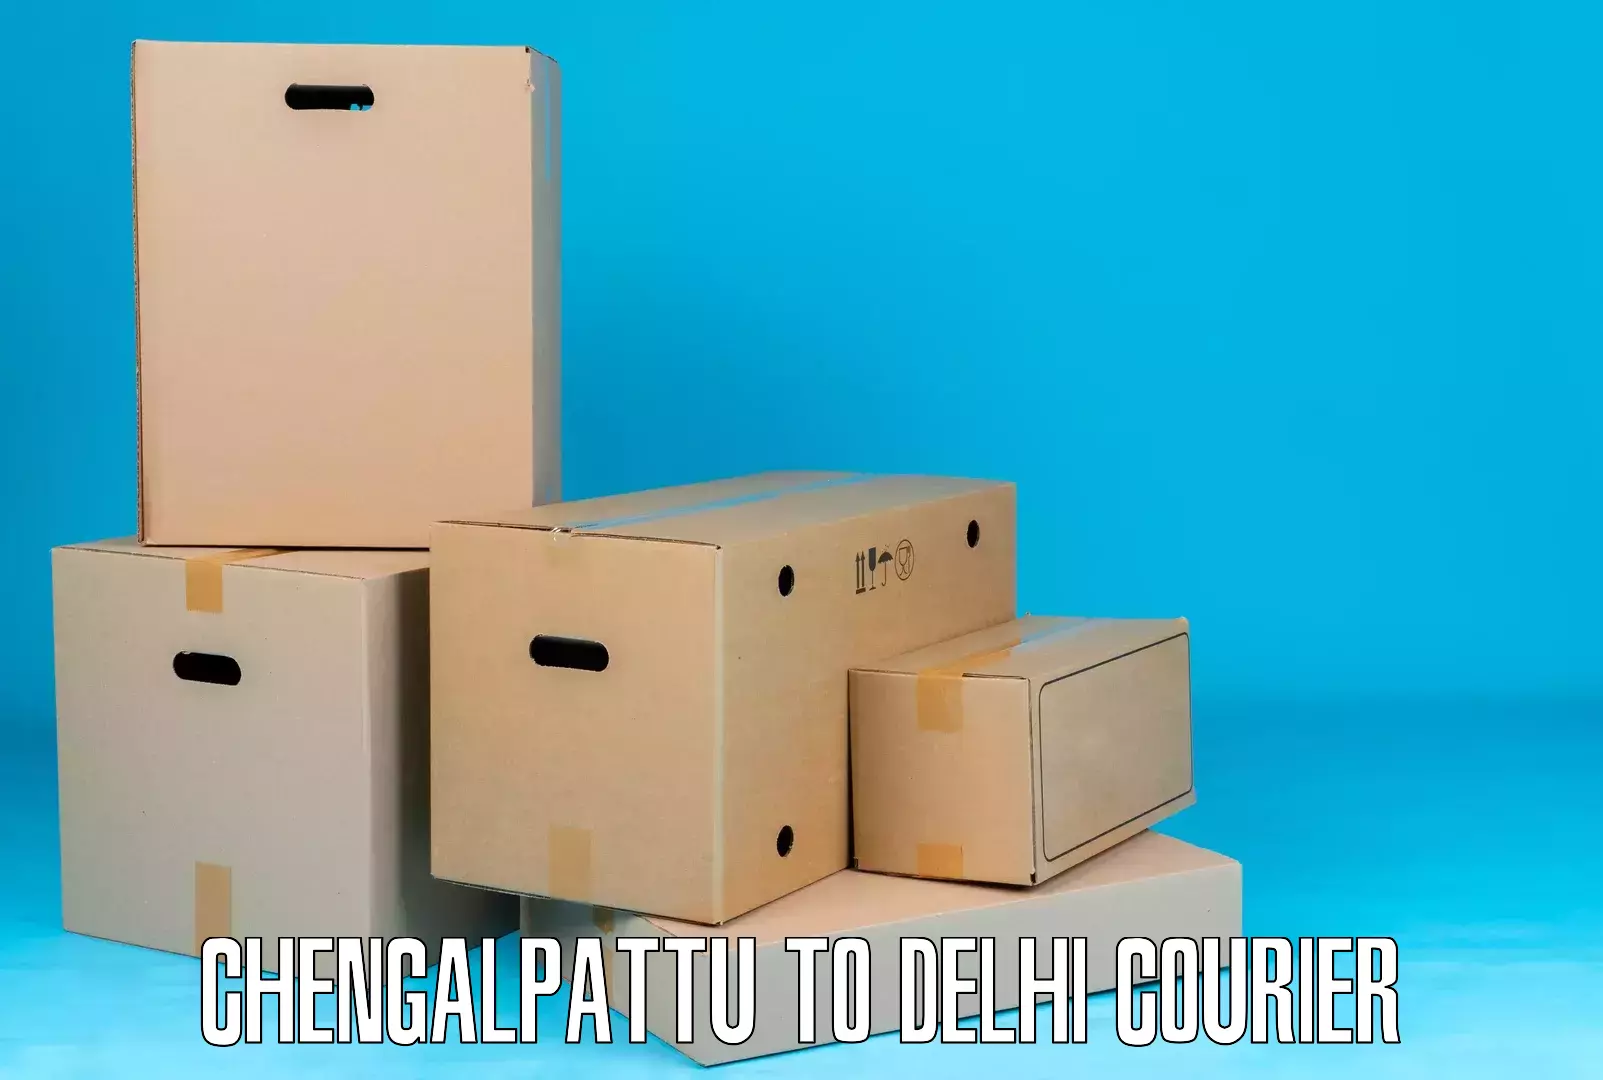 International courier networks Chengalpattu to NCR